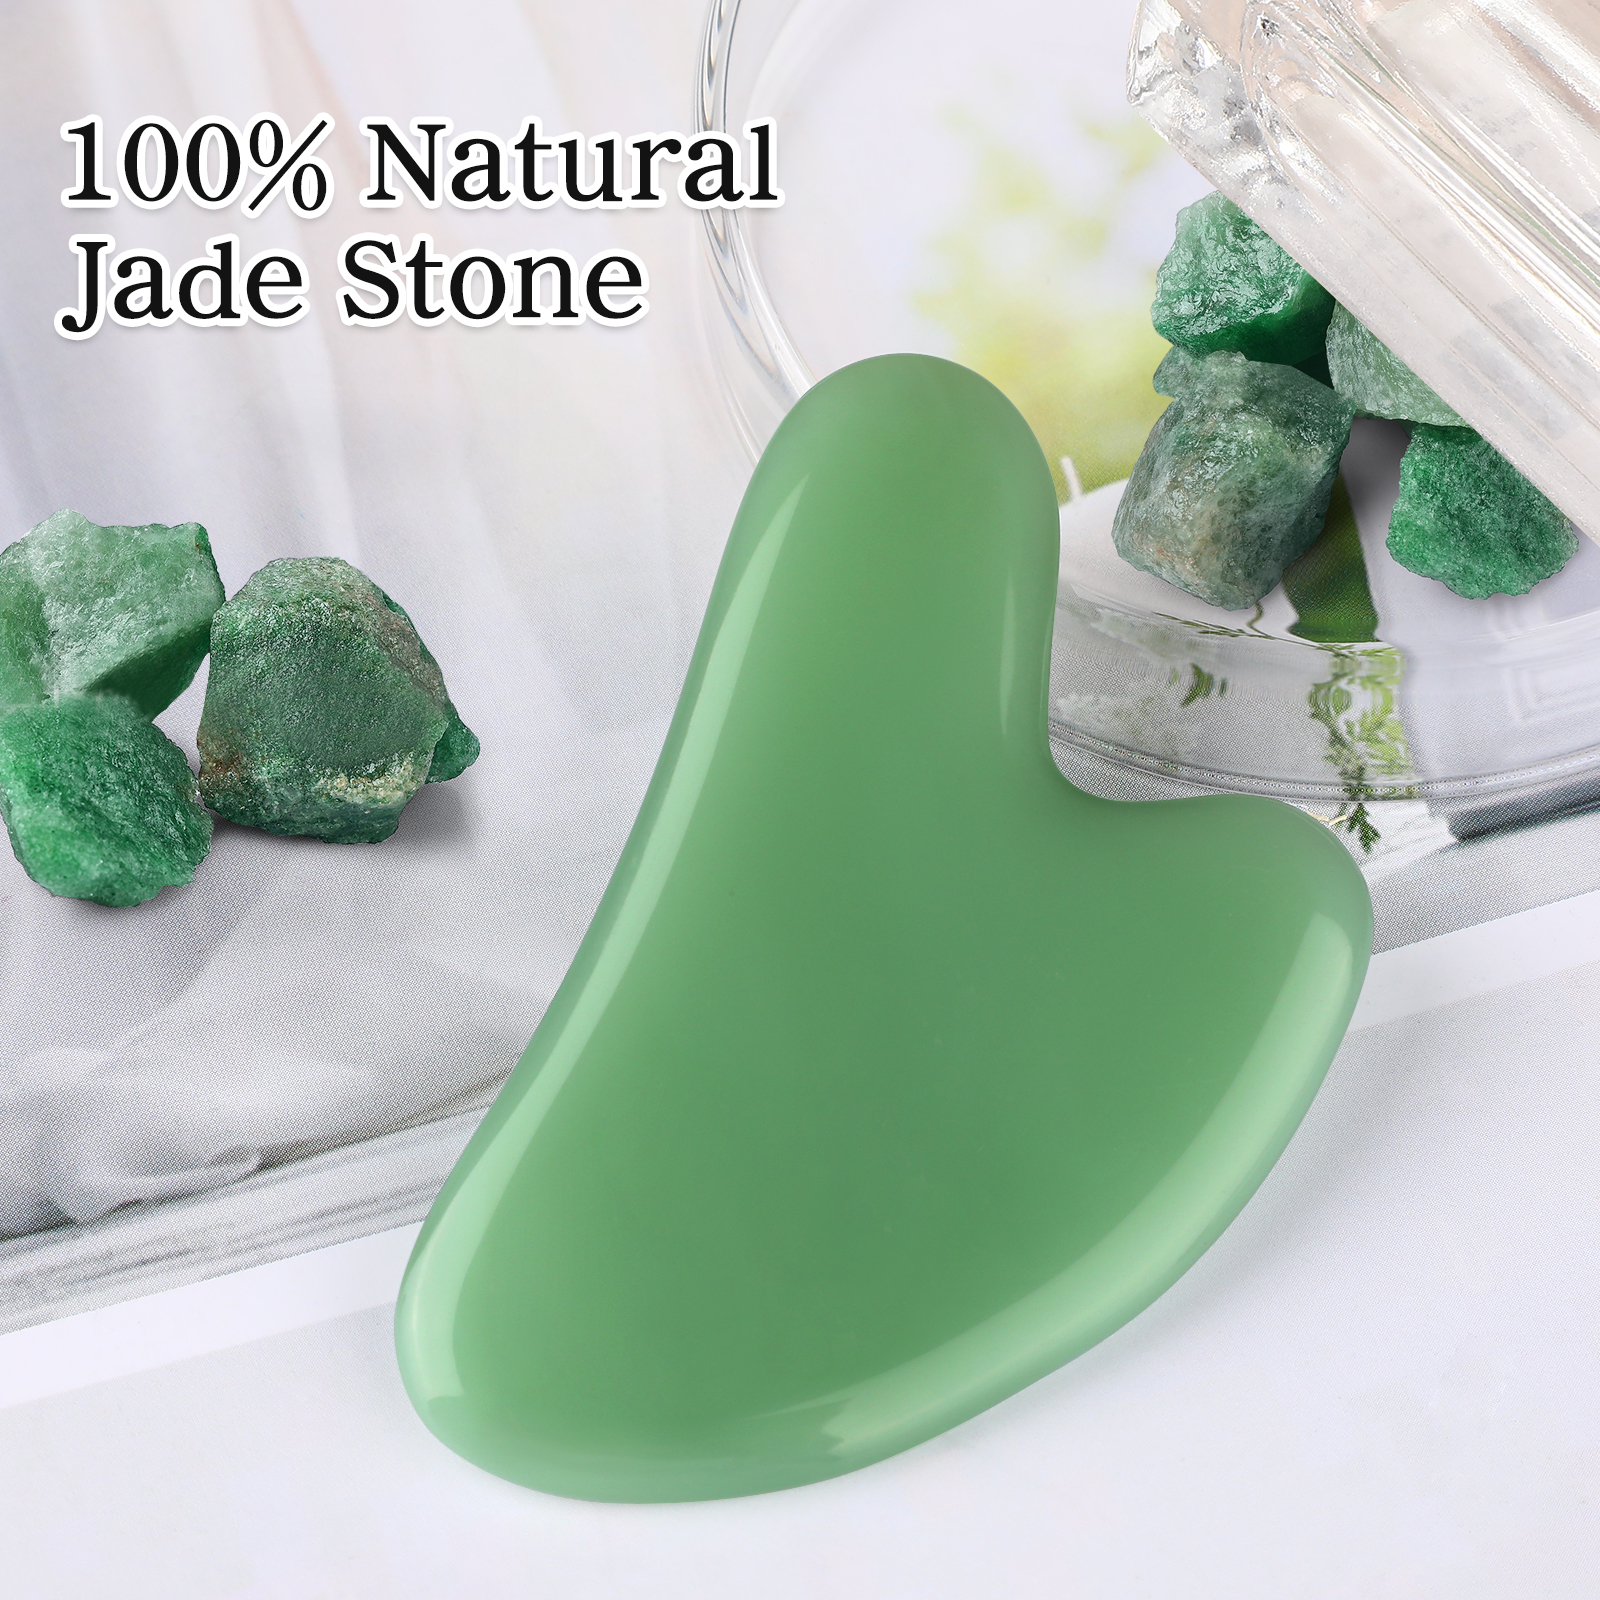 Gua Sha Jade Stone Tools Guasha Tool for Face Skincare Facial Body Acupuncture Relieve Muscle Tensions Reduce Puffiness Festive Gifts